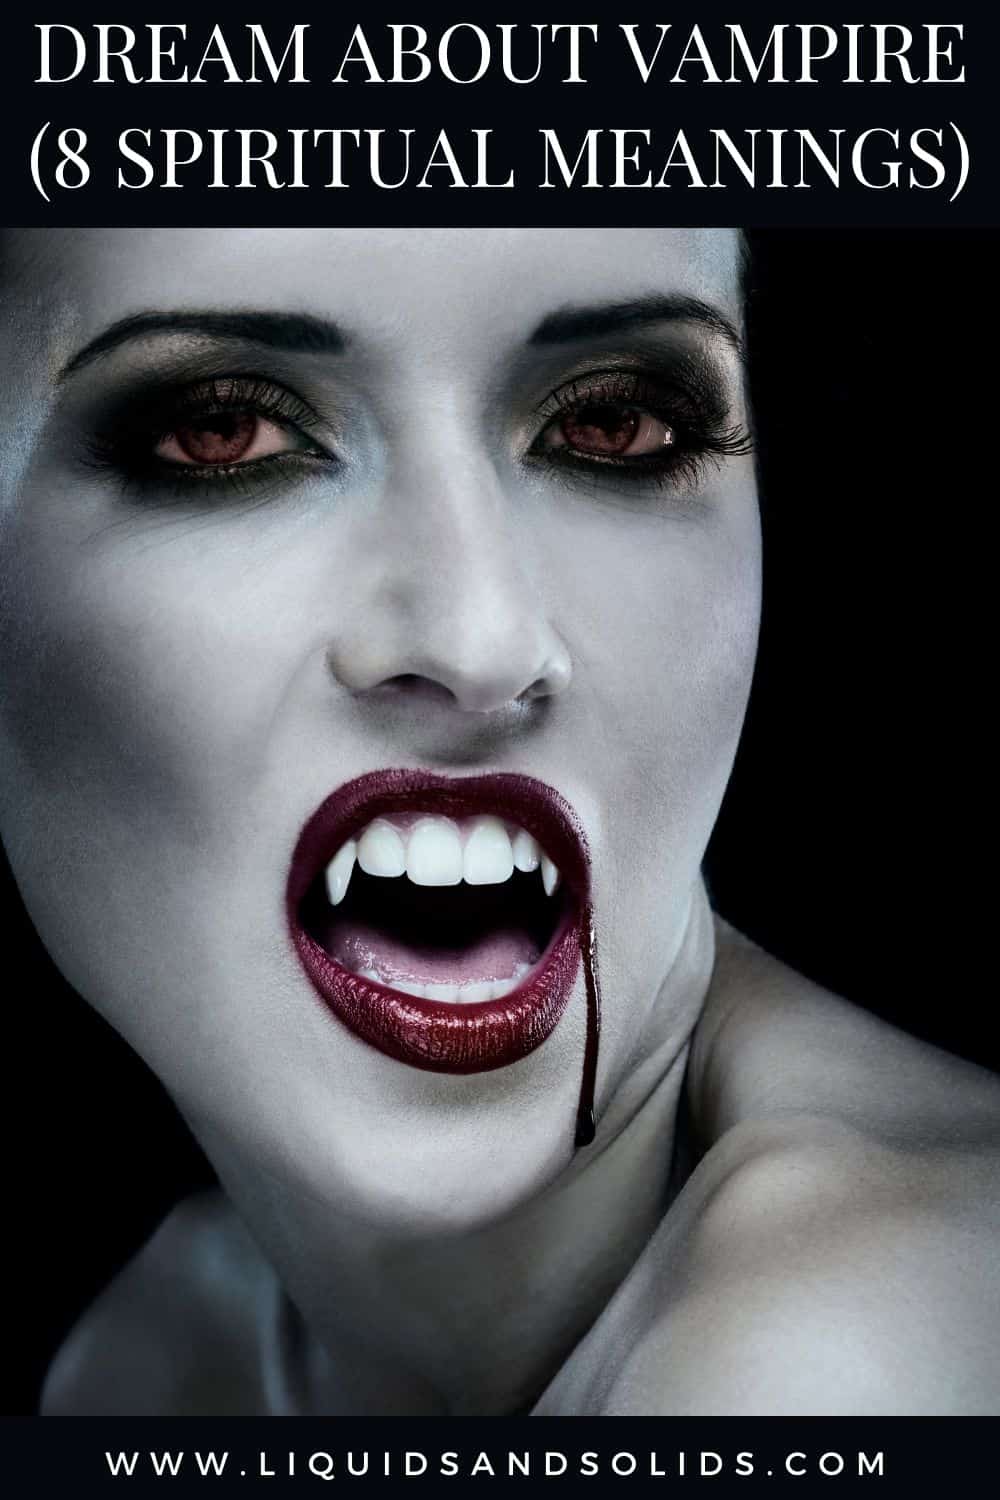 Dream About Vampire (8 Spiritual Meanings)